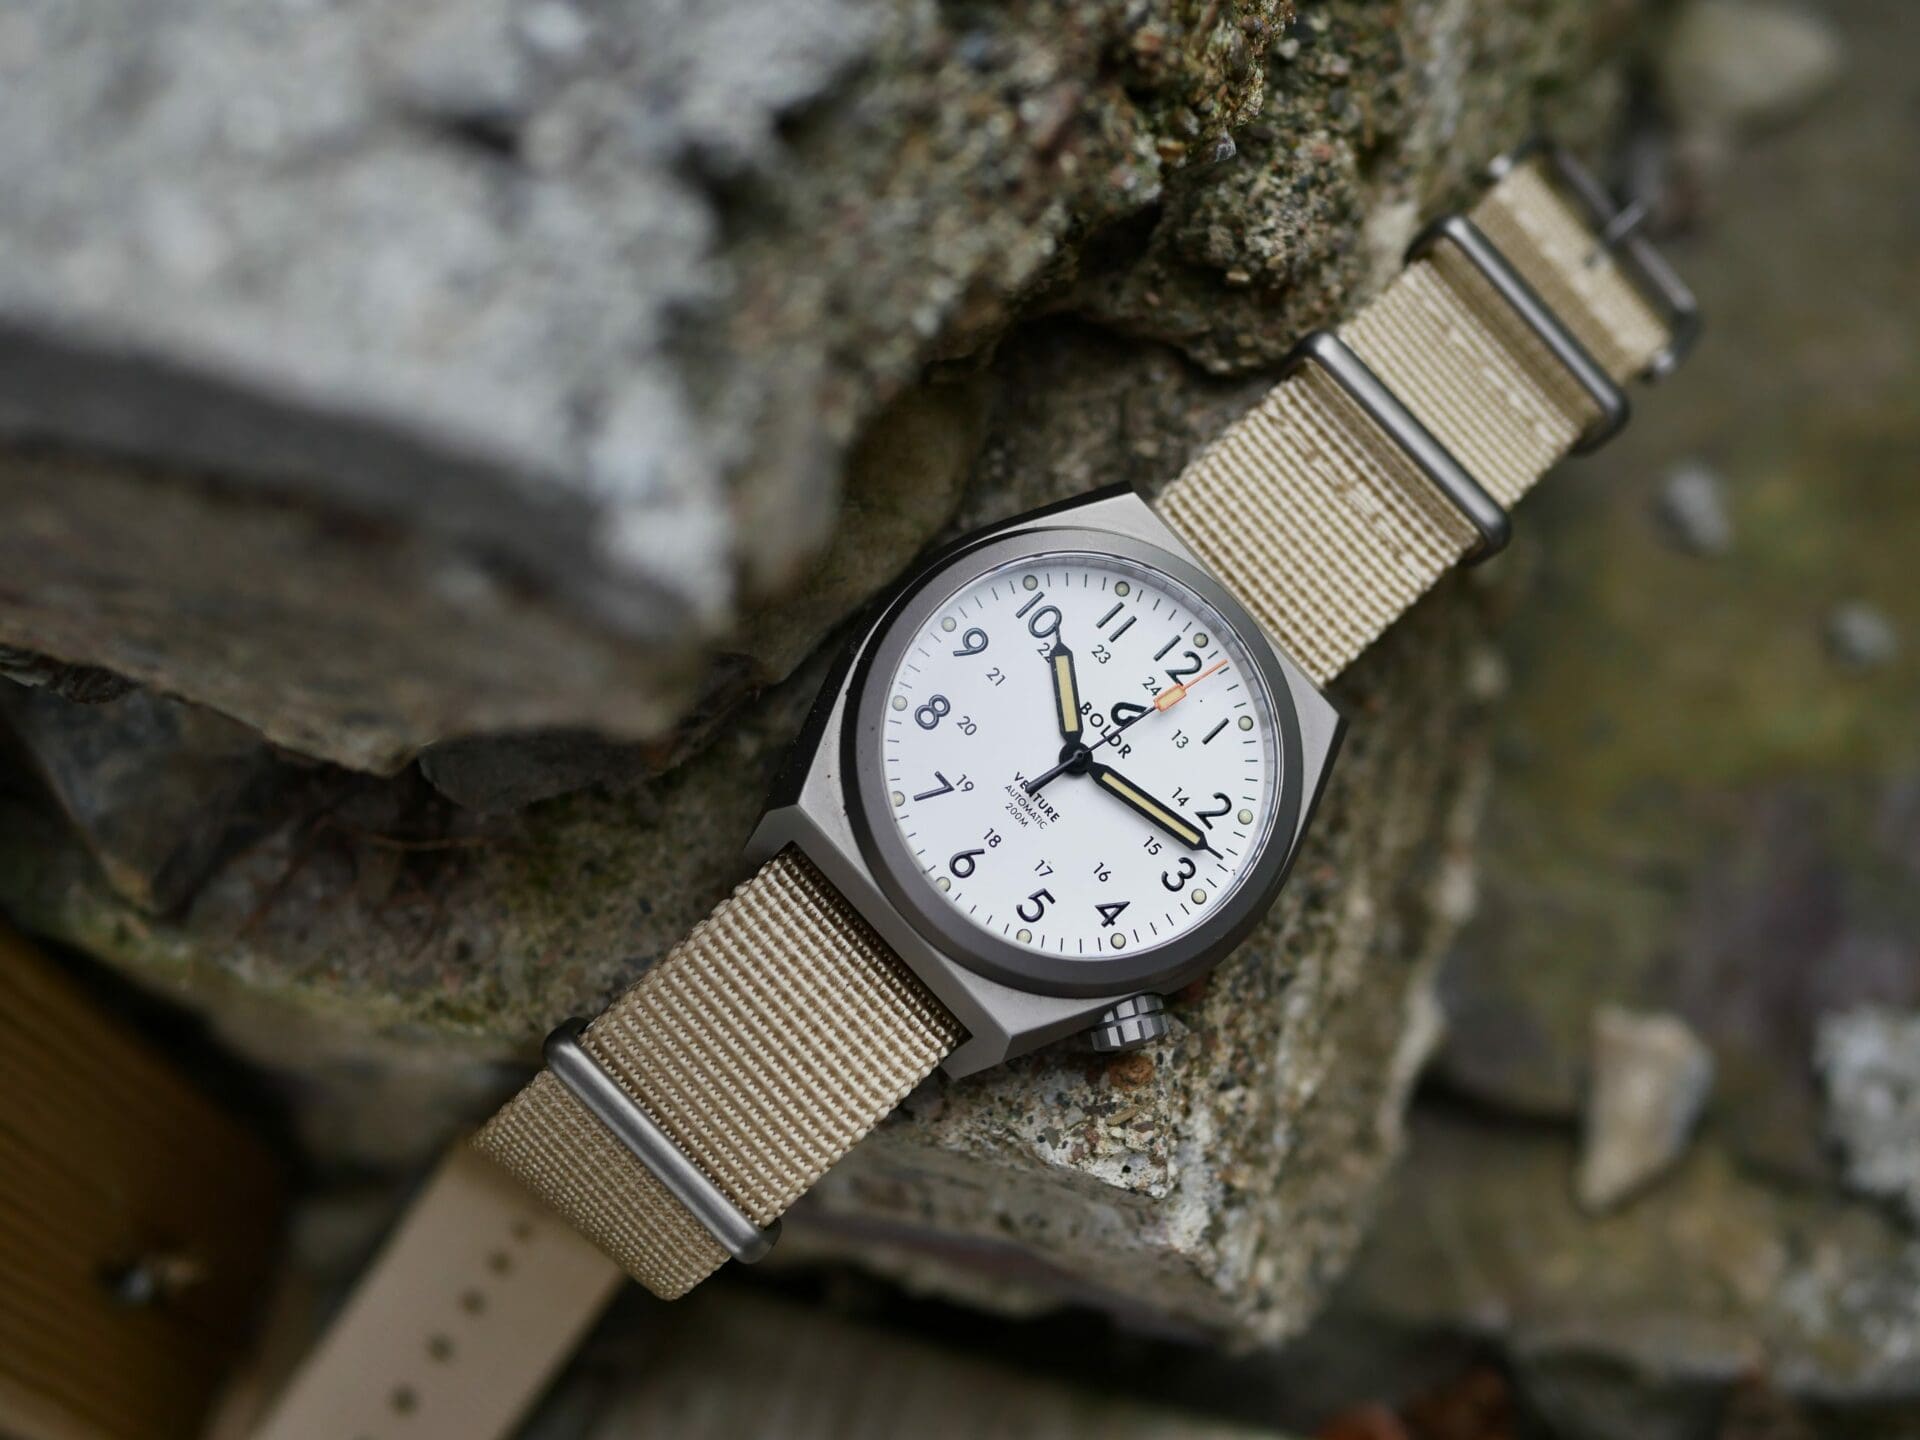 MICRO MONDAYS: The Boldr Venture might be the best value titanium watch on the market